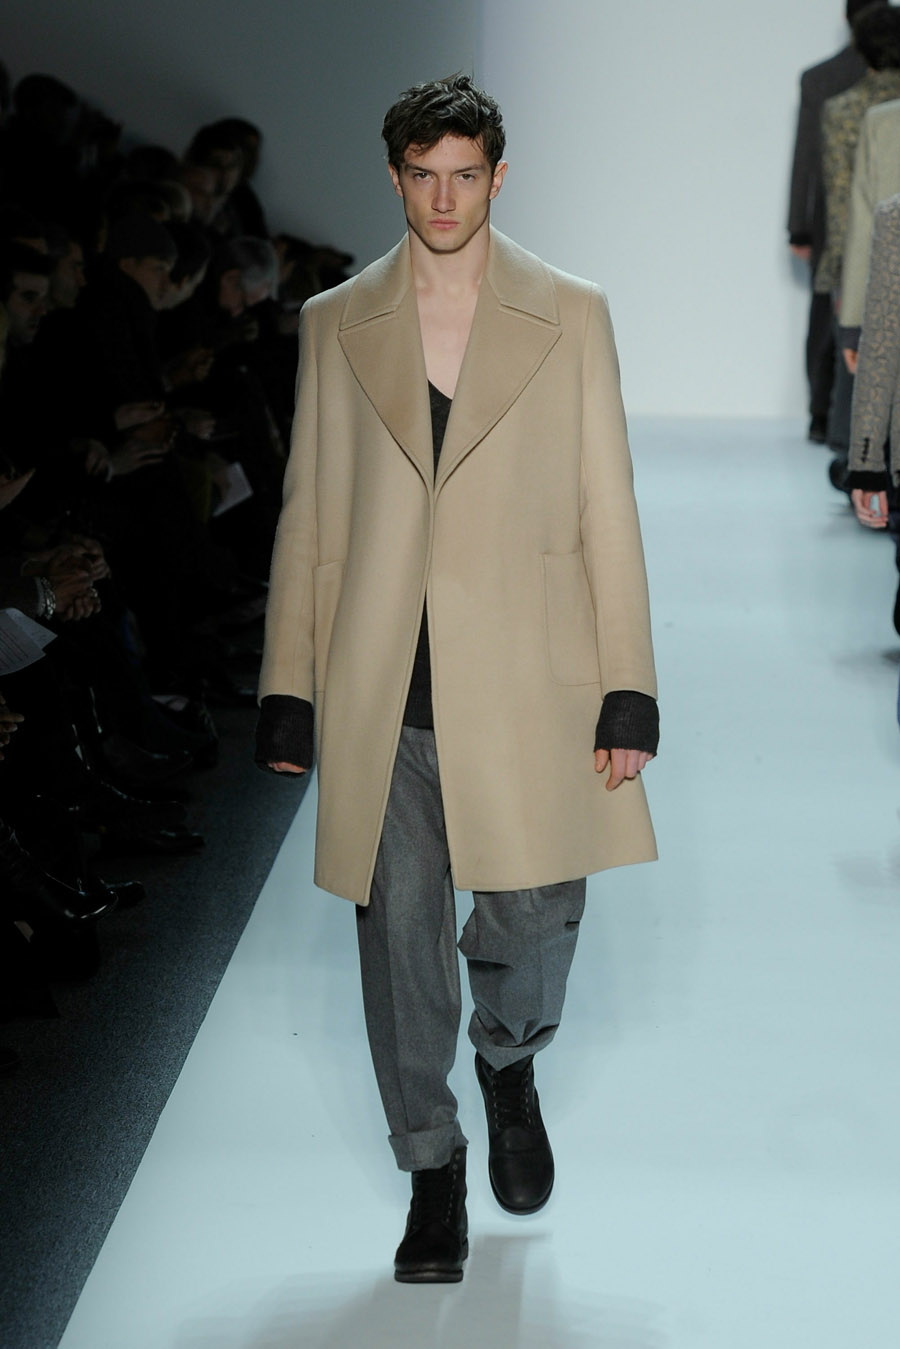 Duckie Brown Fall 2011: A New Direction